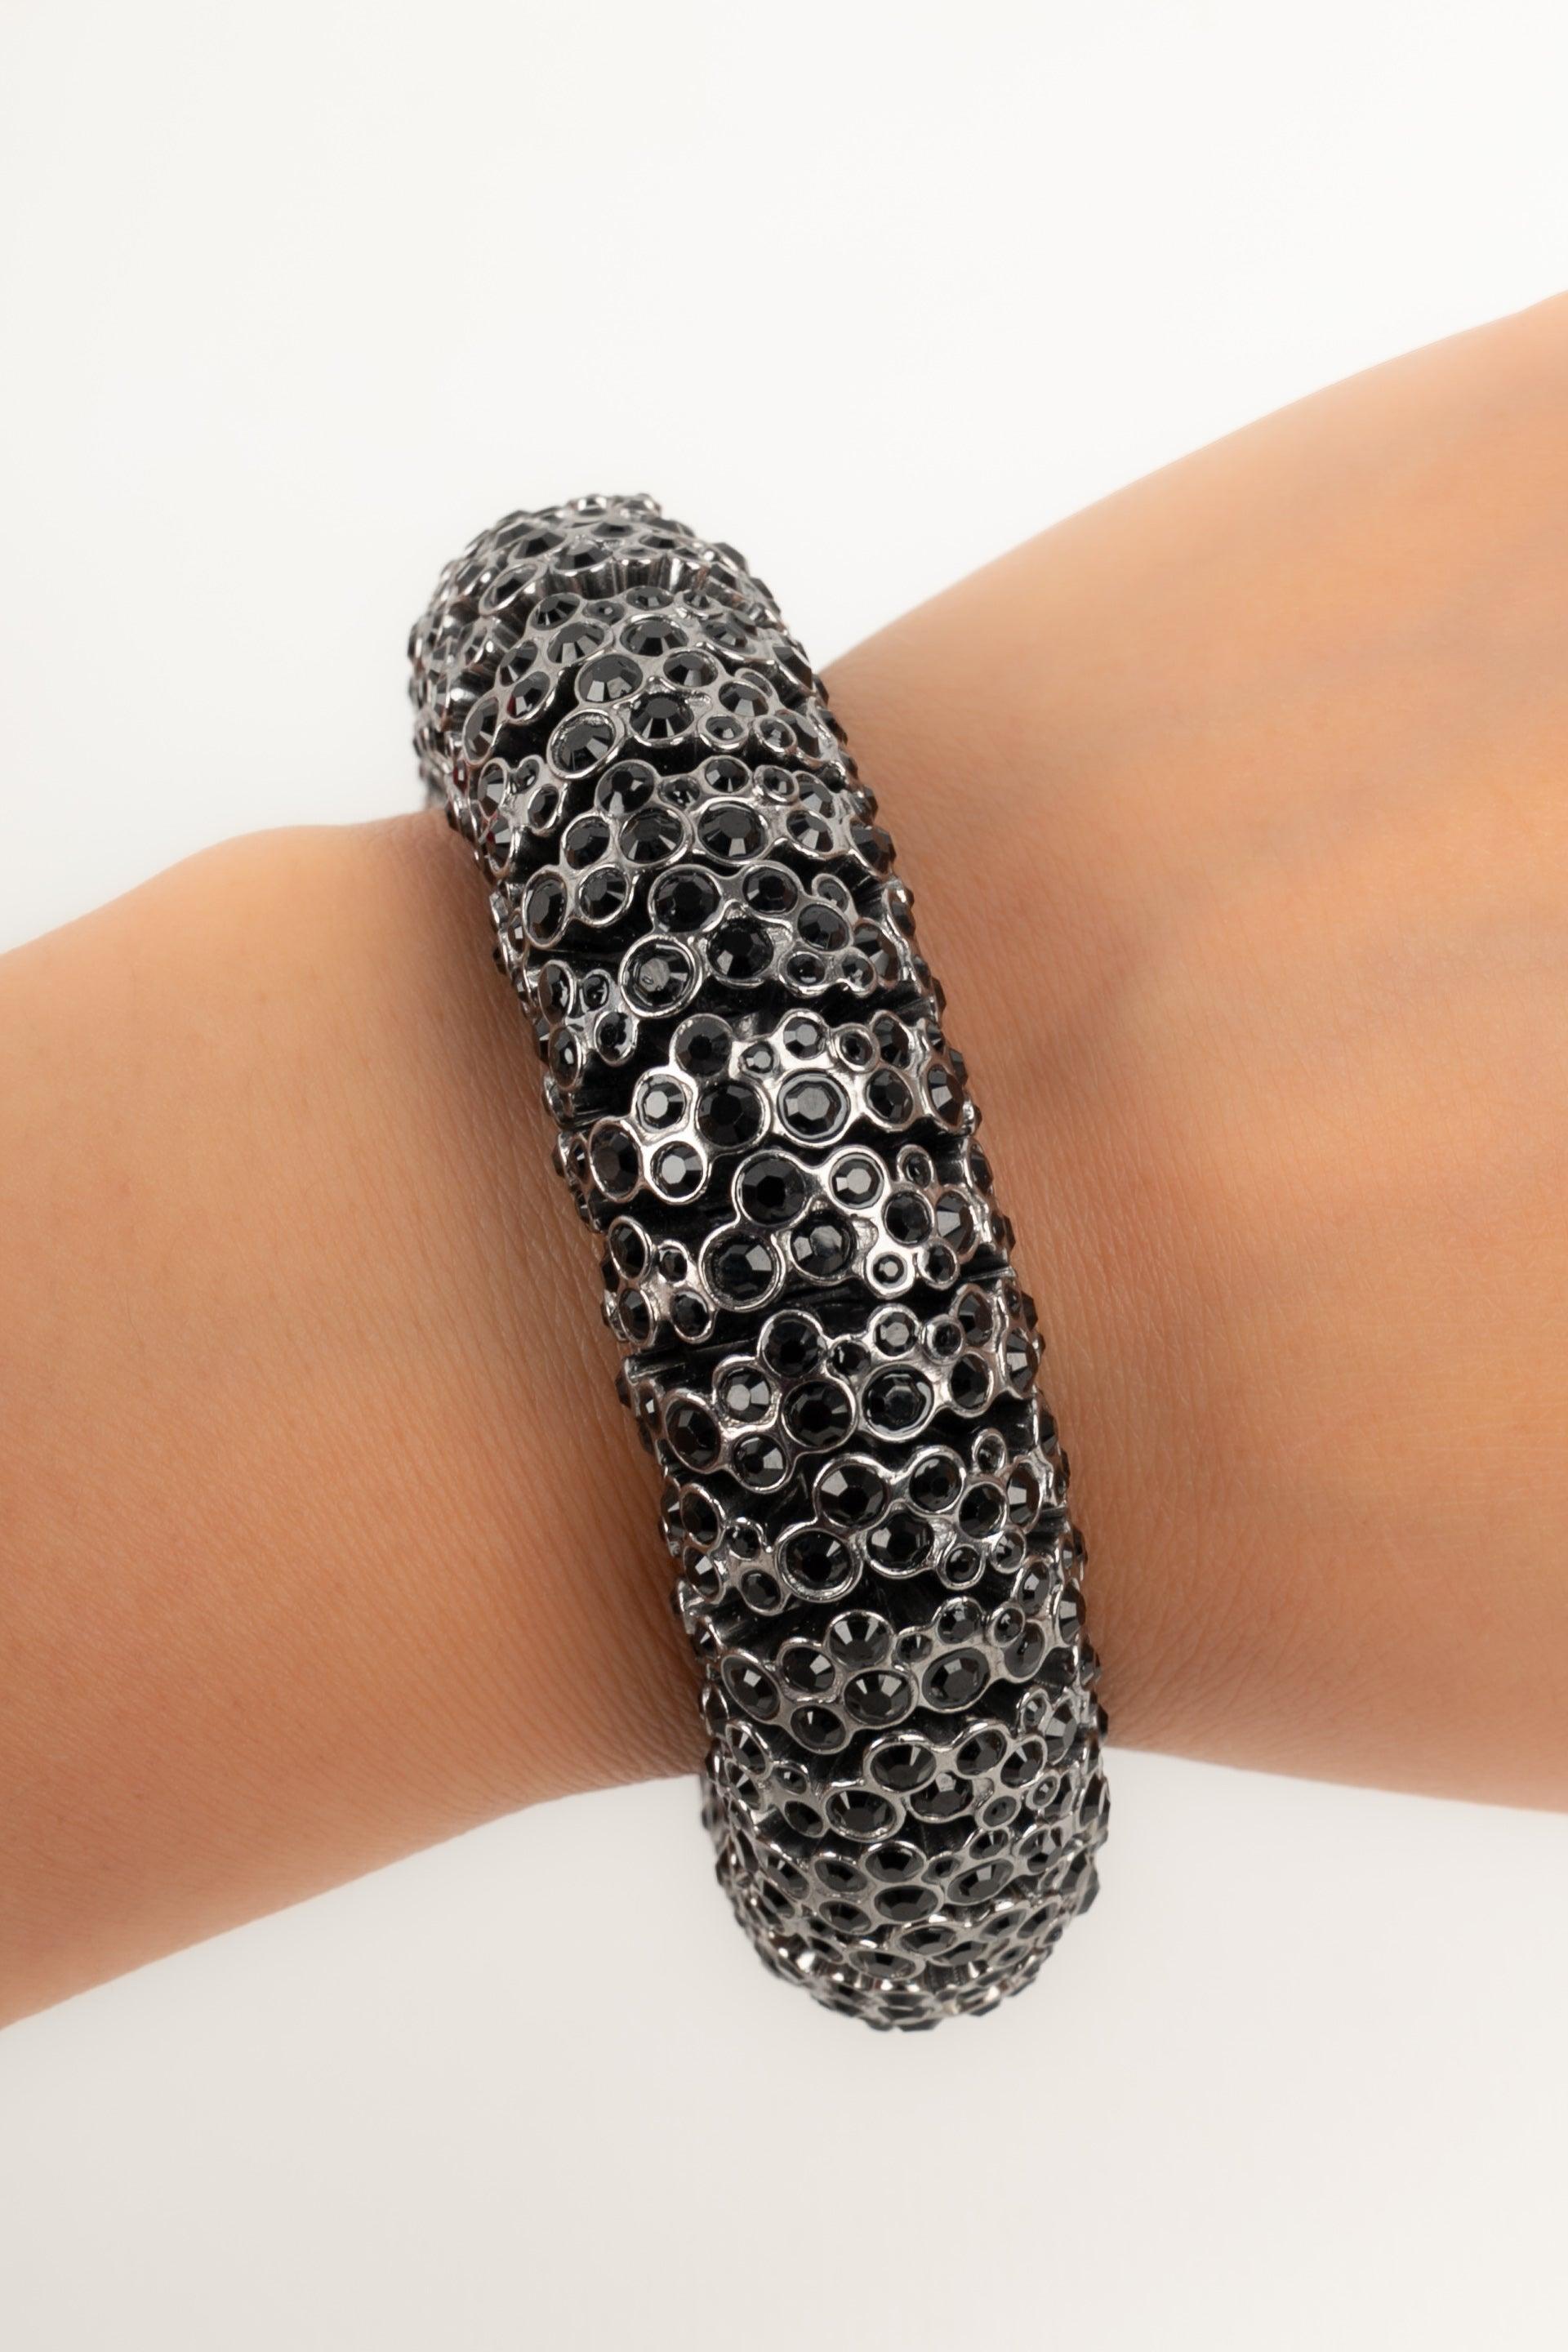 Celine- (Made in Italy) Dark-silvery metal bracelet, ornamented with black rhinestones.

Additional information:
Condition: Very good condition
Dimensions: Circumference: 15 cm

Seller Reference: BRA43